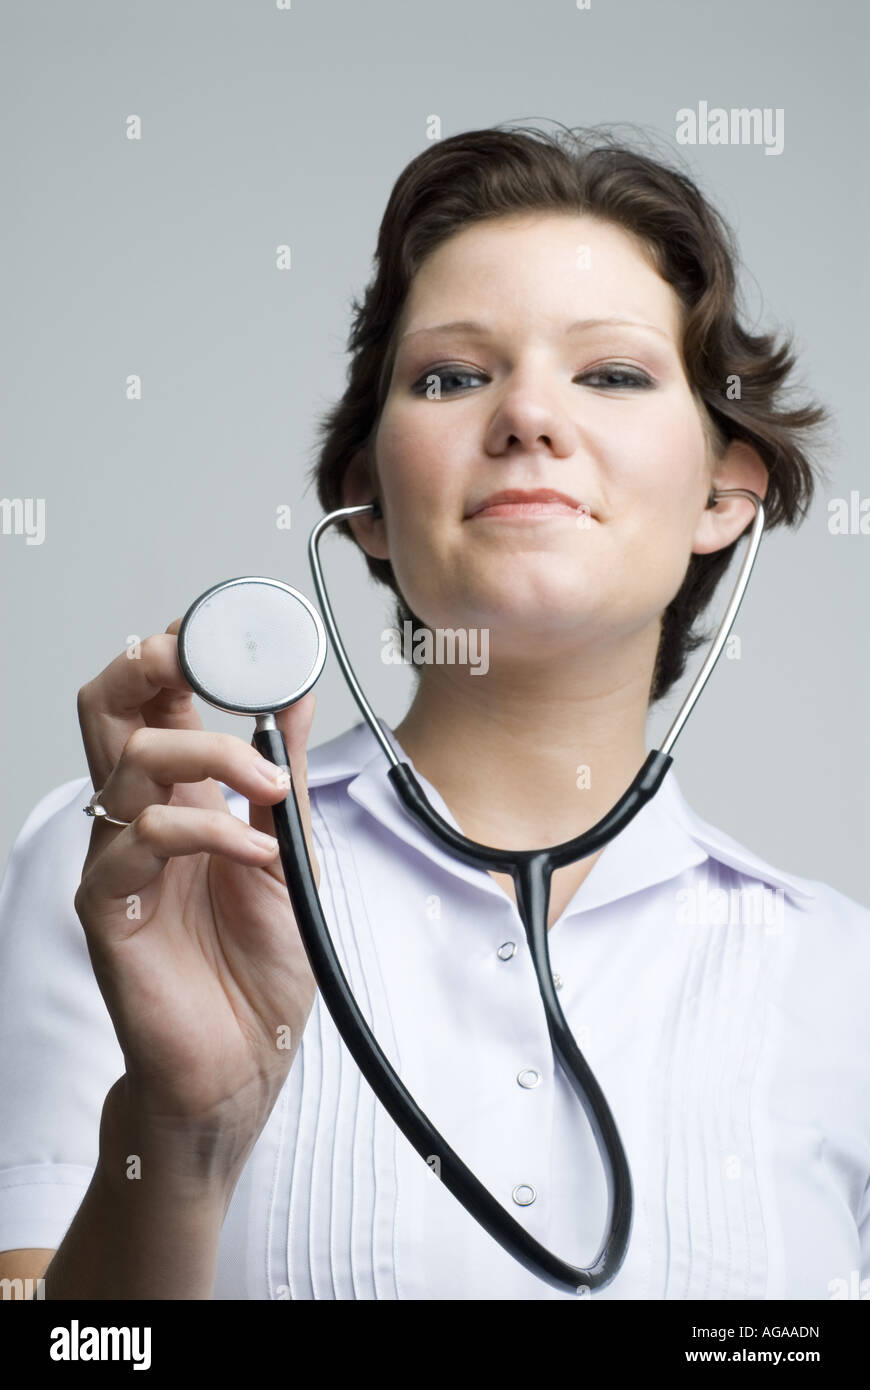 Close-up of a female doctor wearing a stethoscope Stock Photo